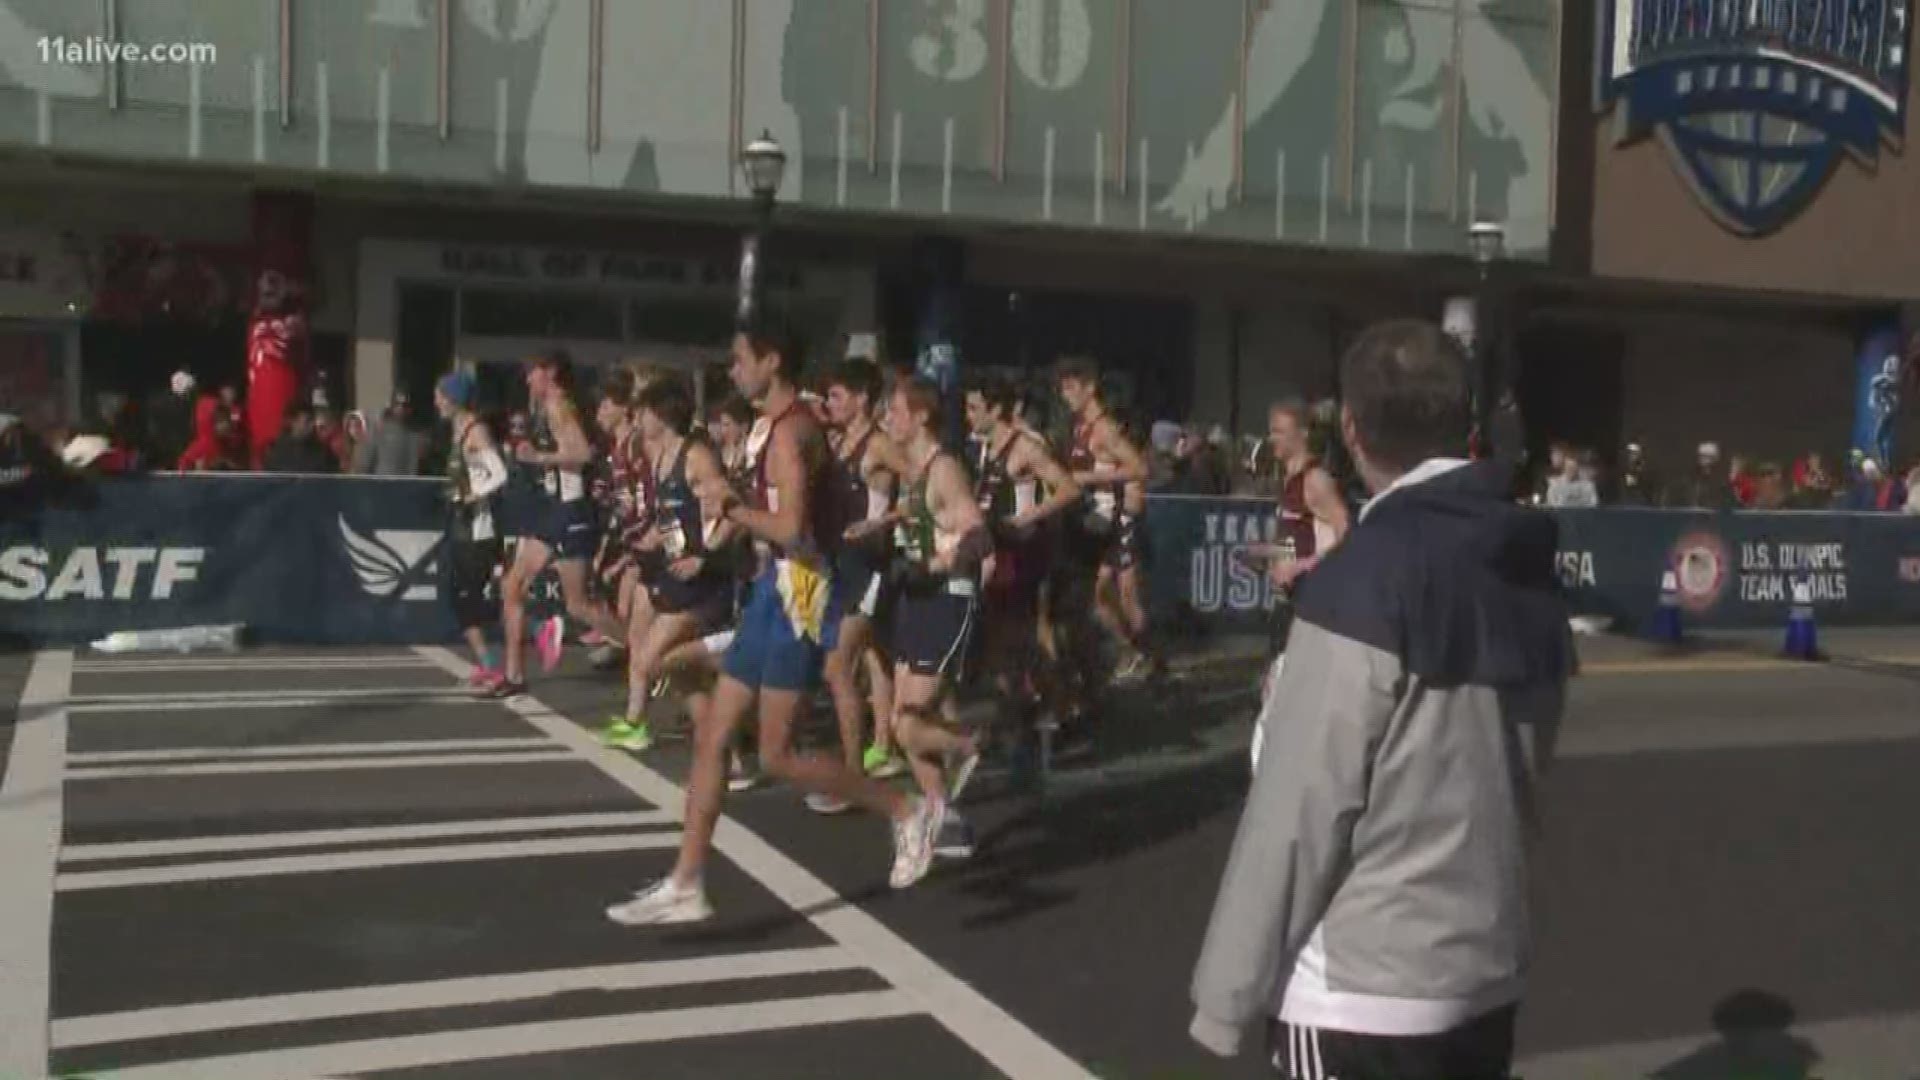 The runners are preparing for the US Olympic Marathon Trials, coming up at noon on Saturday in downtown Atlanta.